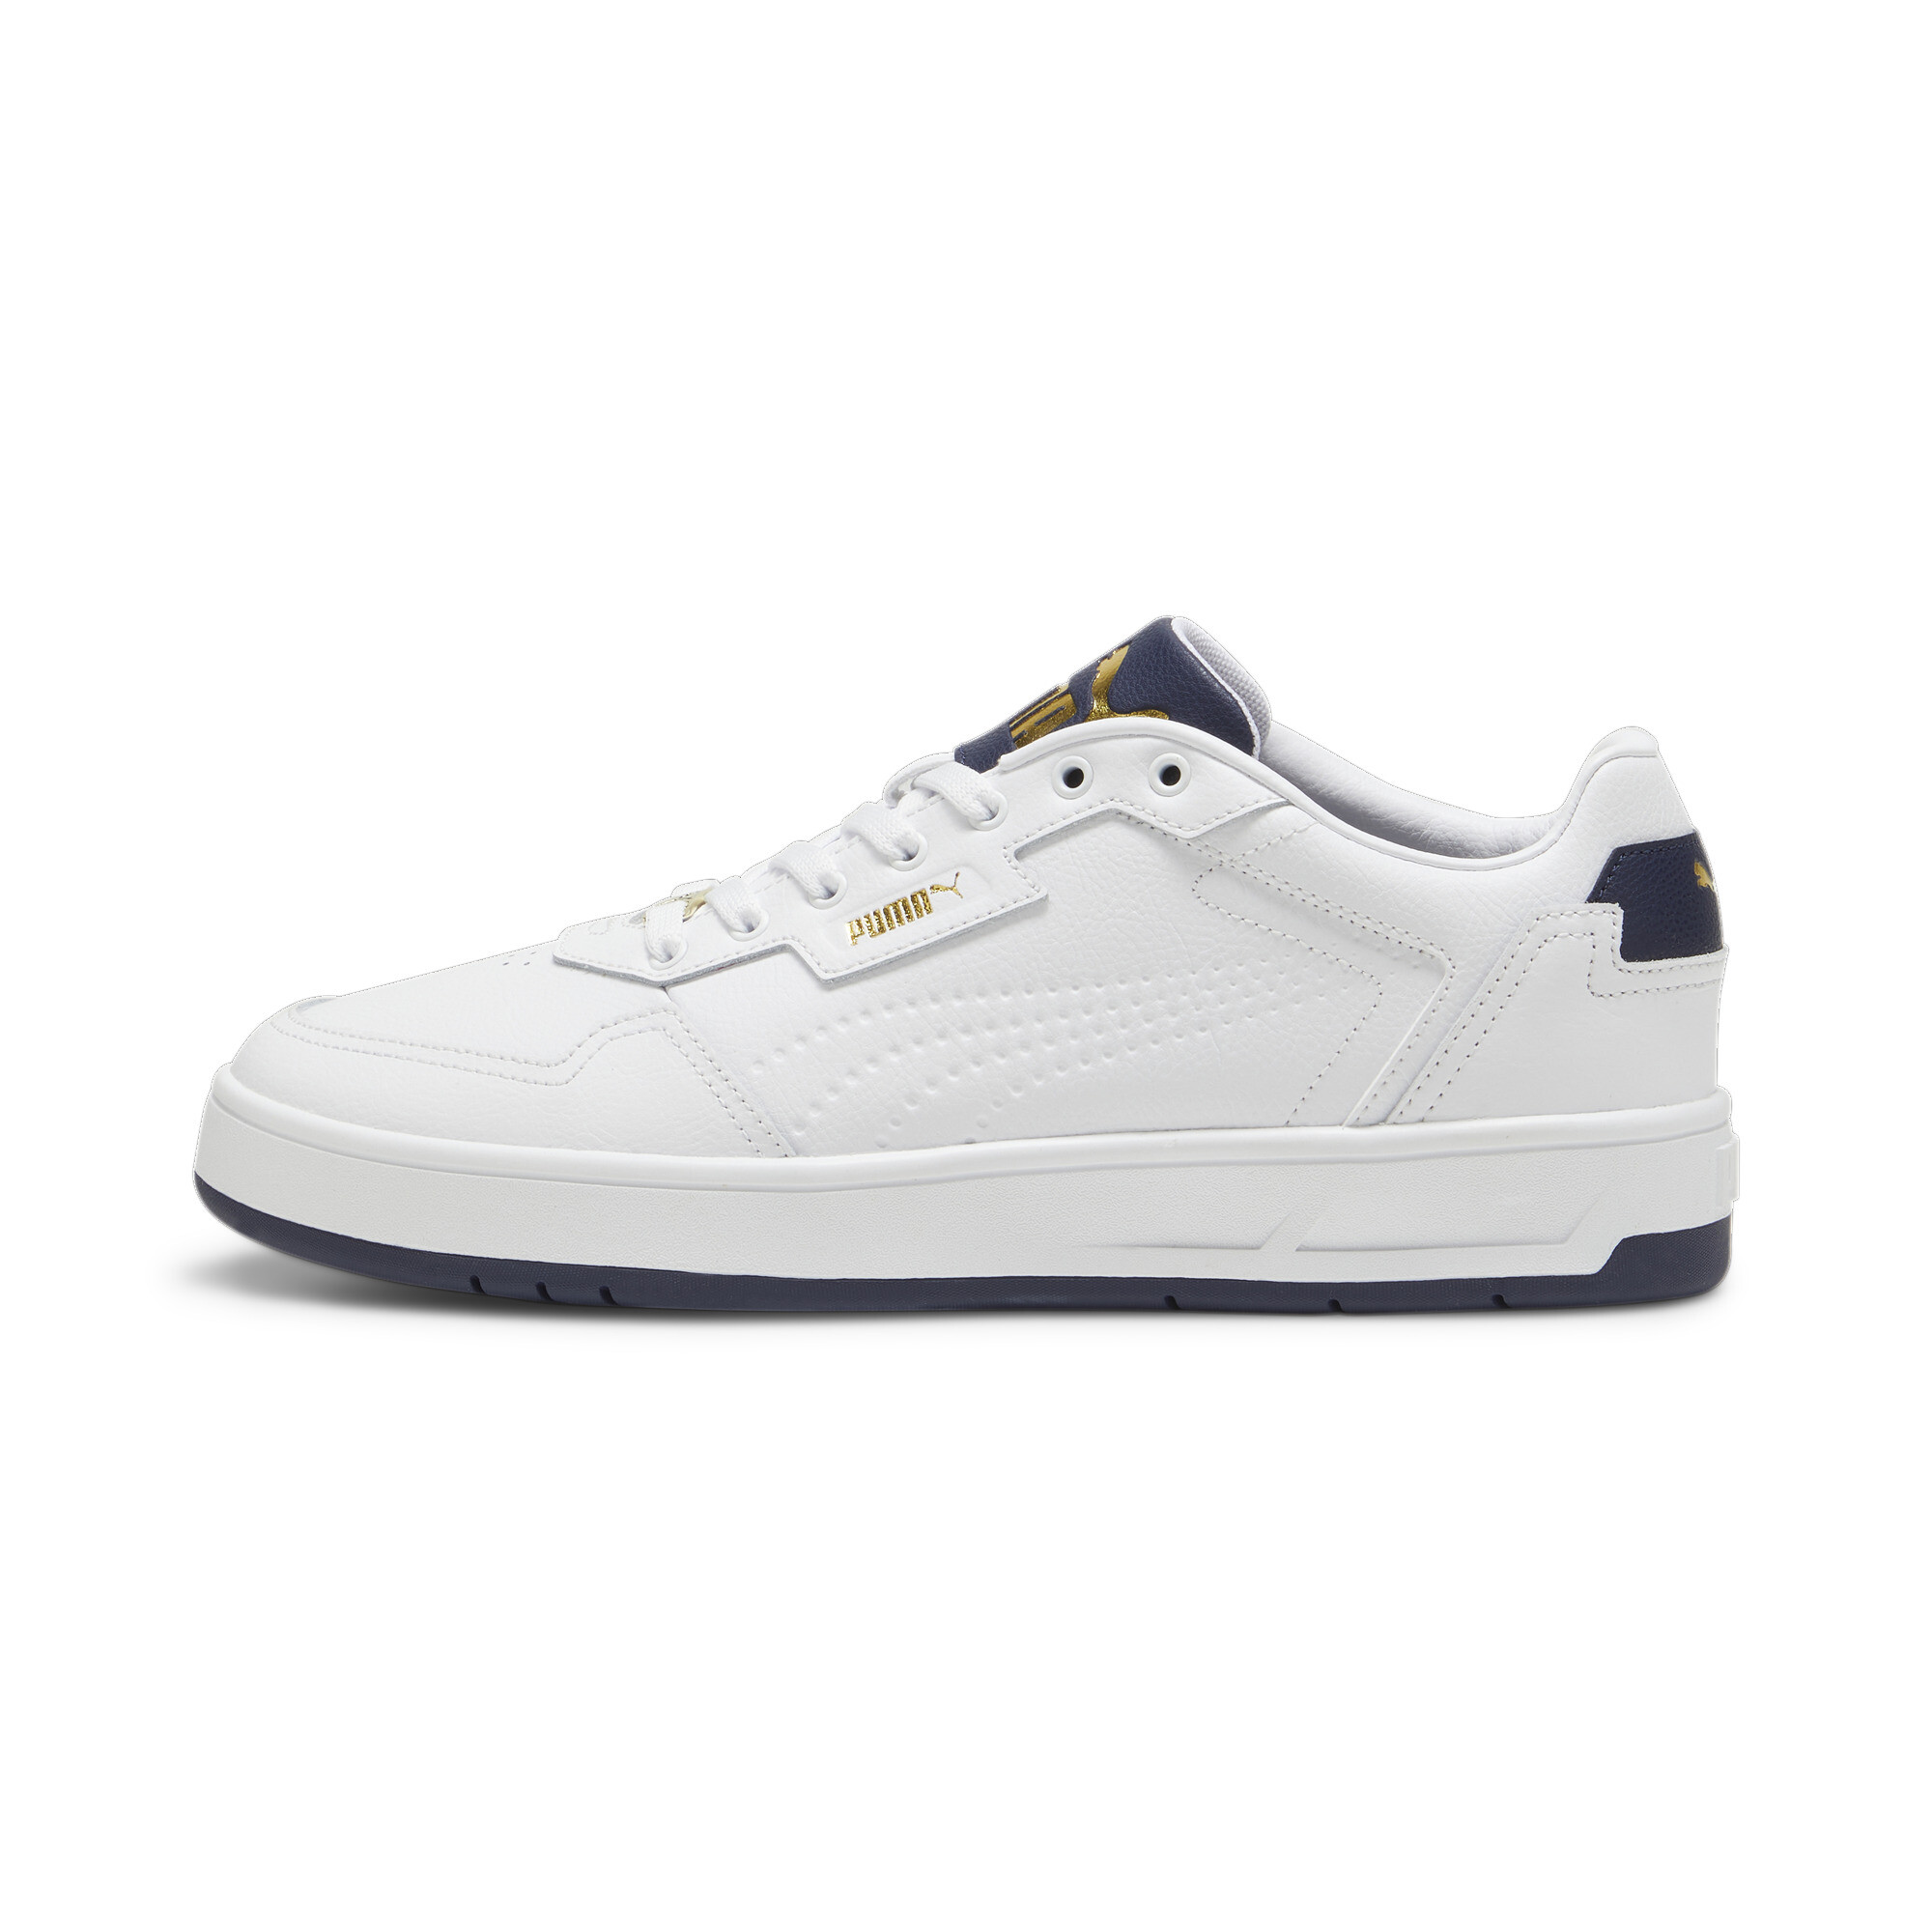 Puma Court Classic Lux Sneakers, White, Size 36, Shoes